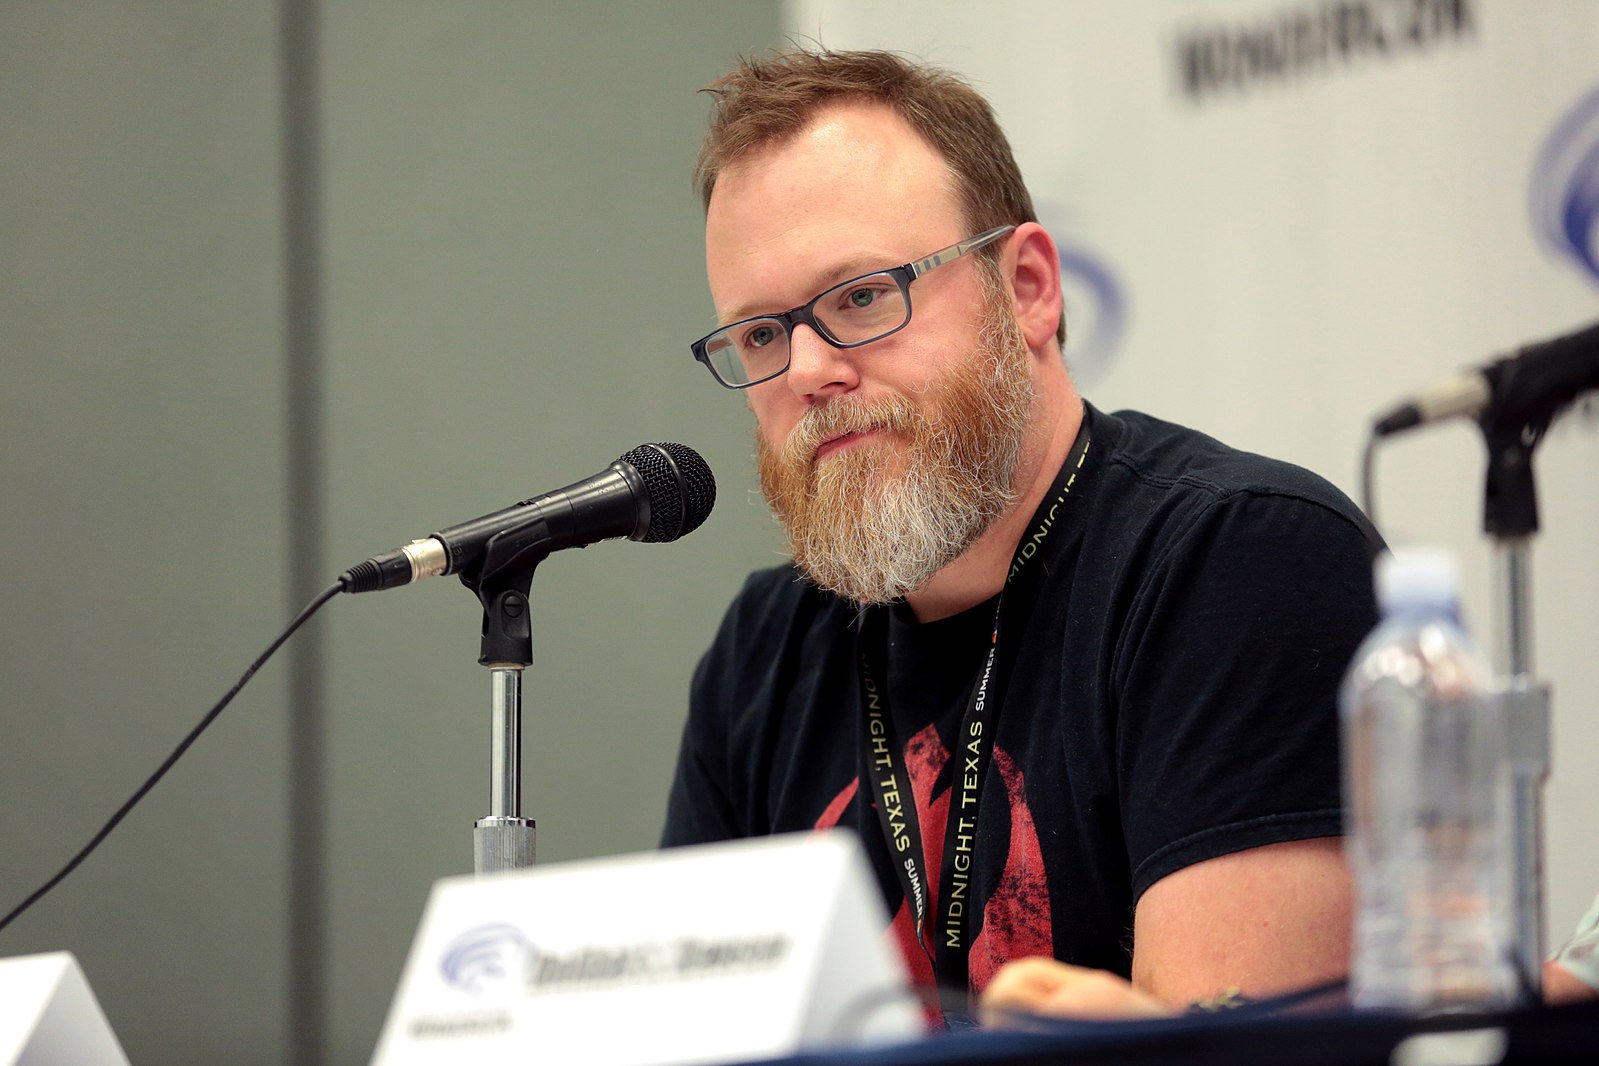 Marvel fires Chuck Wendig from 'Shadow of Vader' miniseries for 'too much politics' on his Twitter